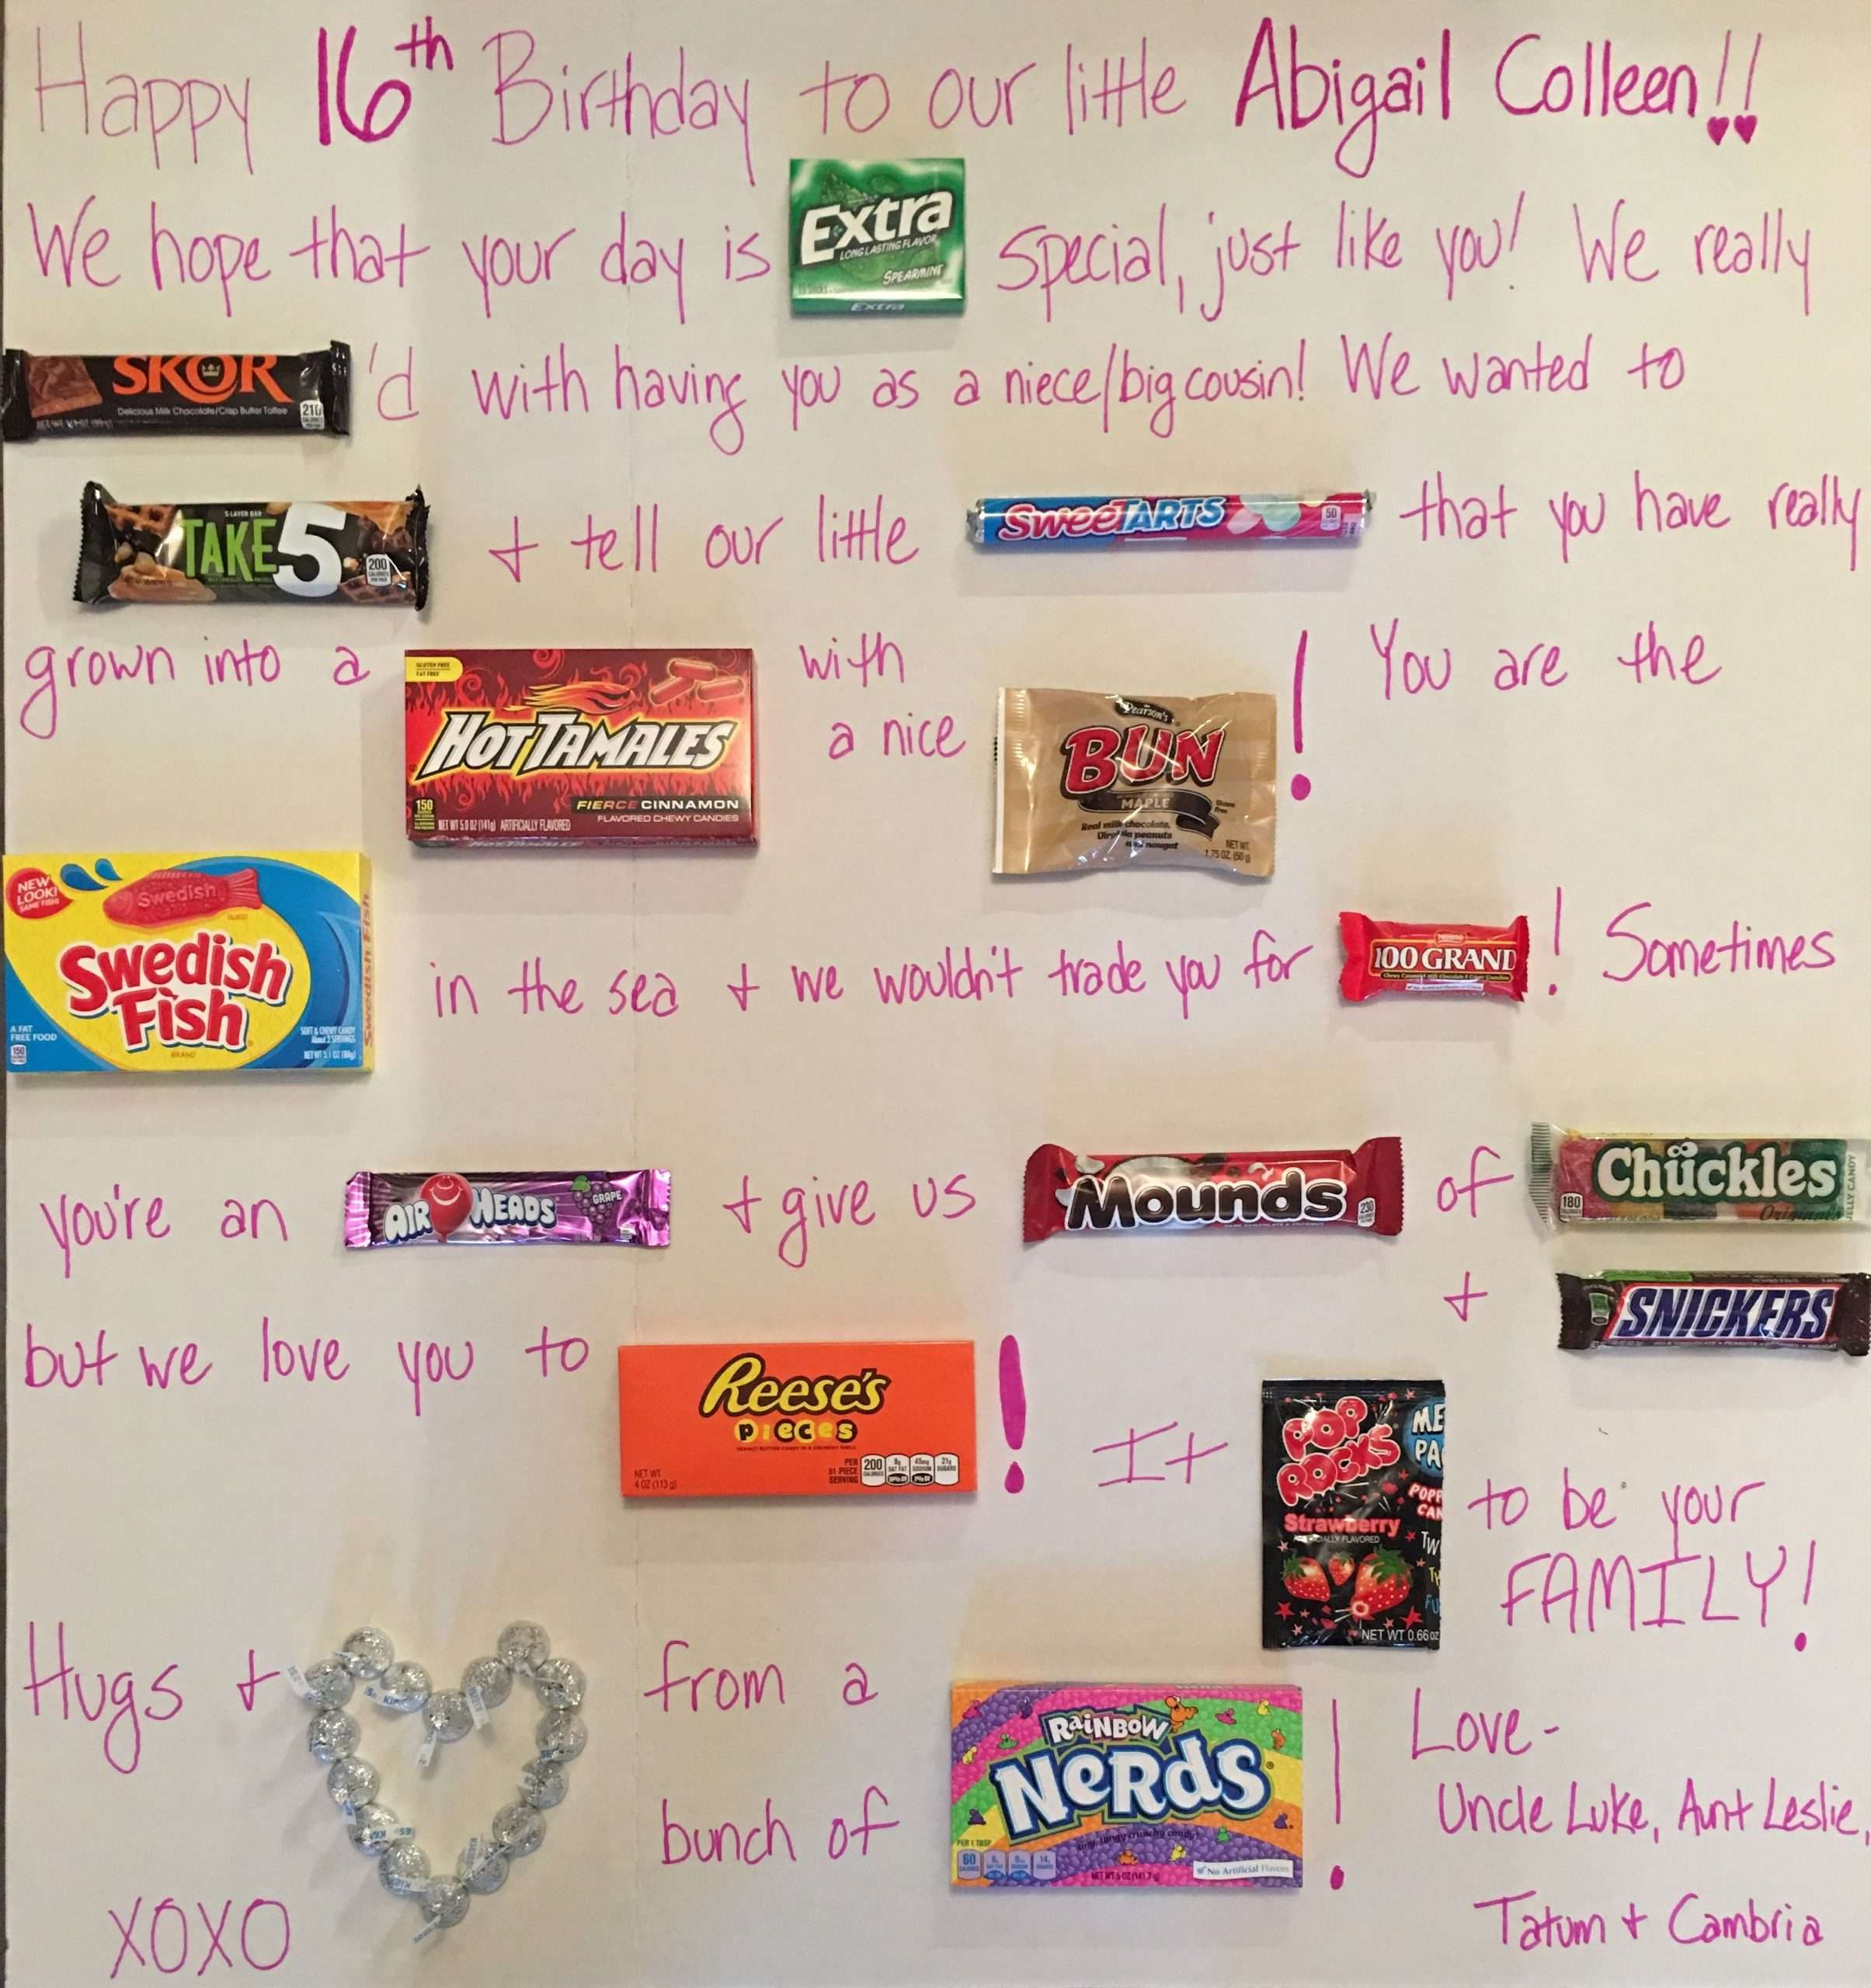 Sweet 16 Candy Board Gift Ideas for Girls.